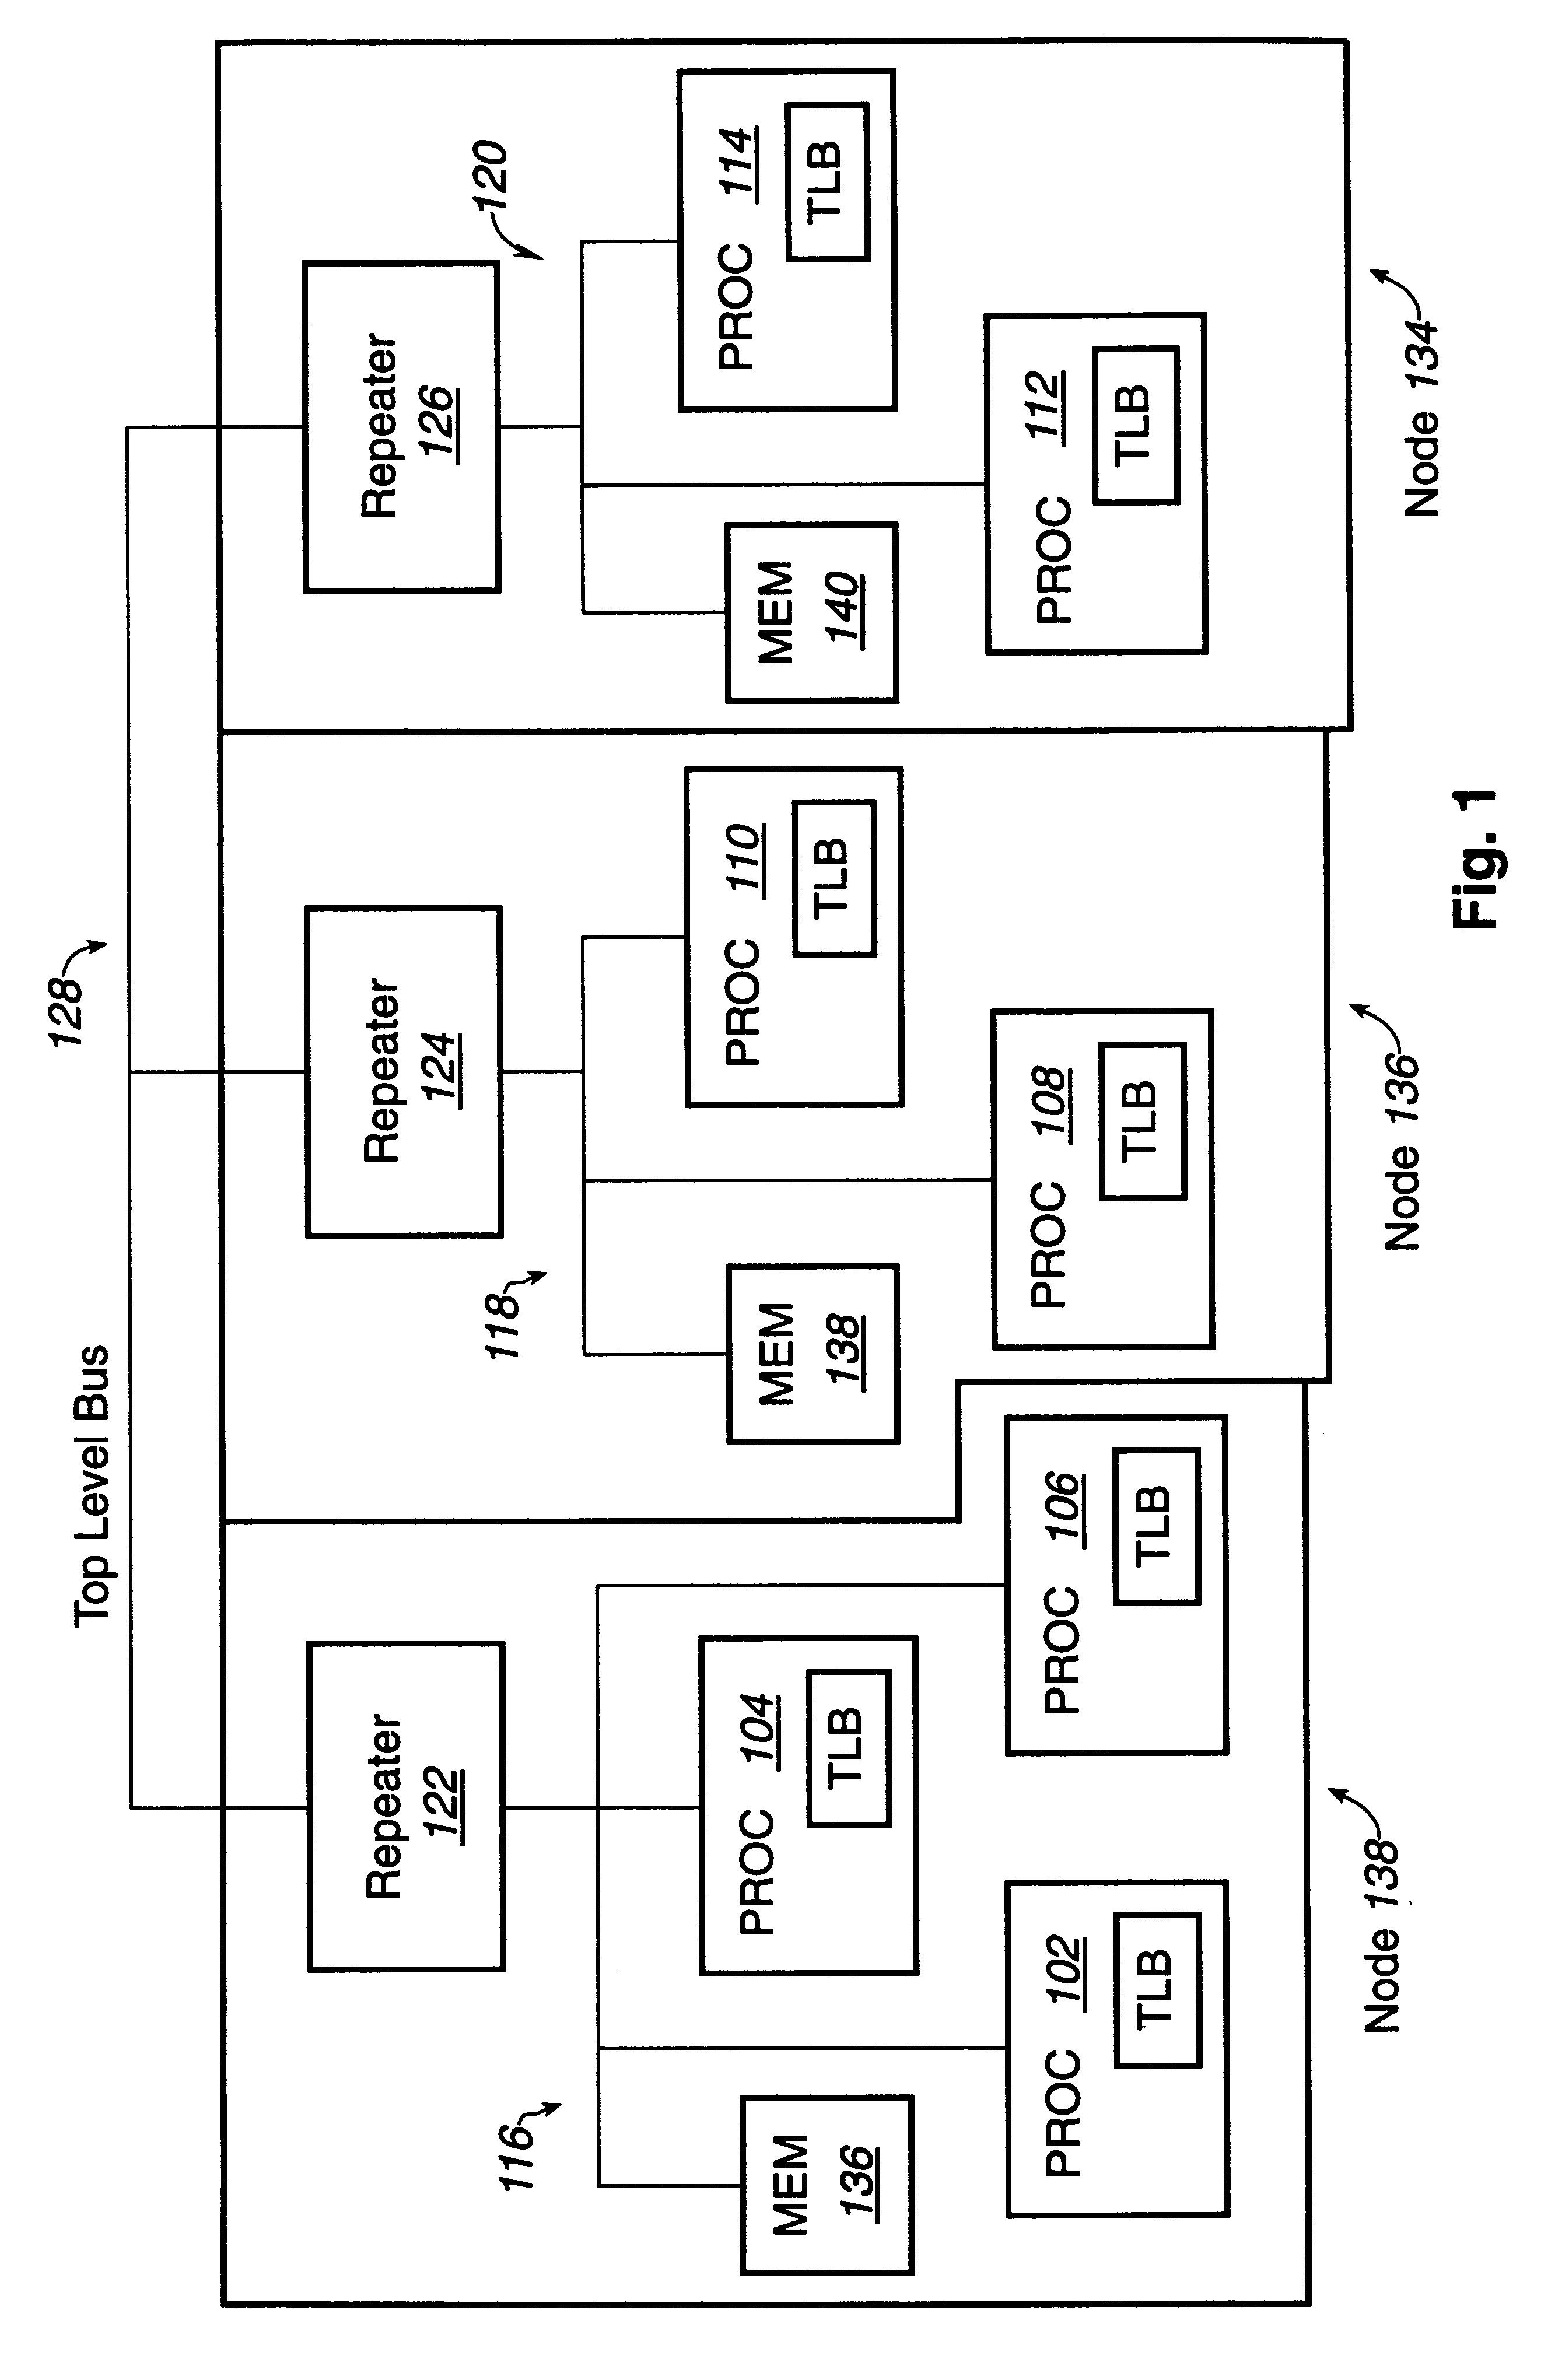 Shared memory system for symmetric multiprocessor systems